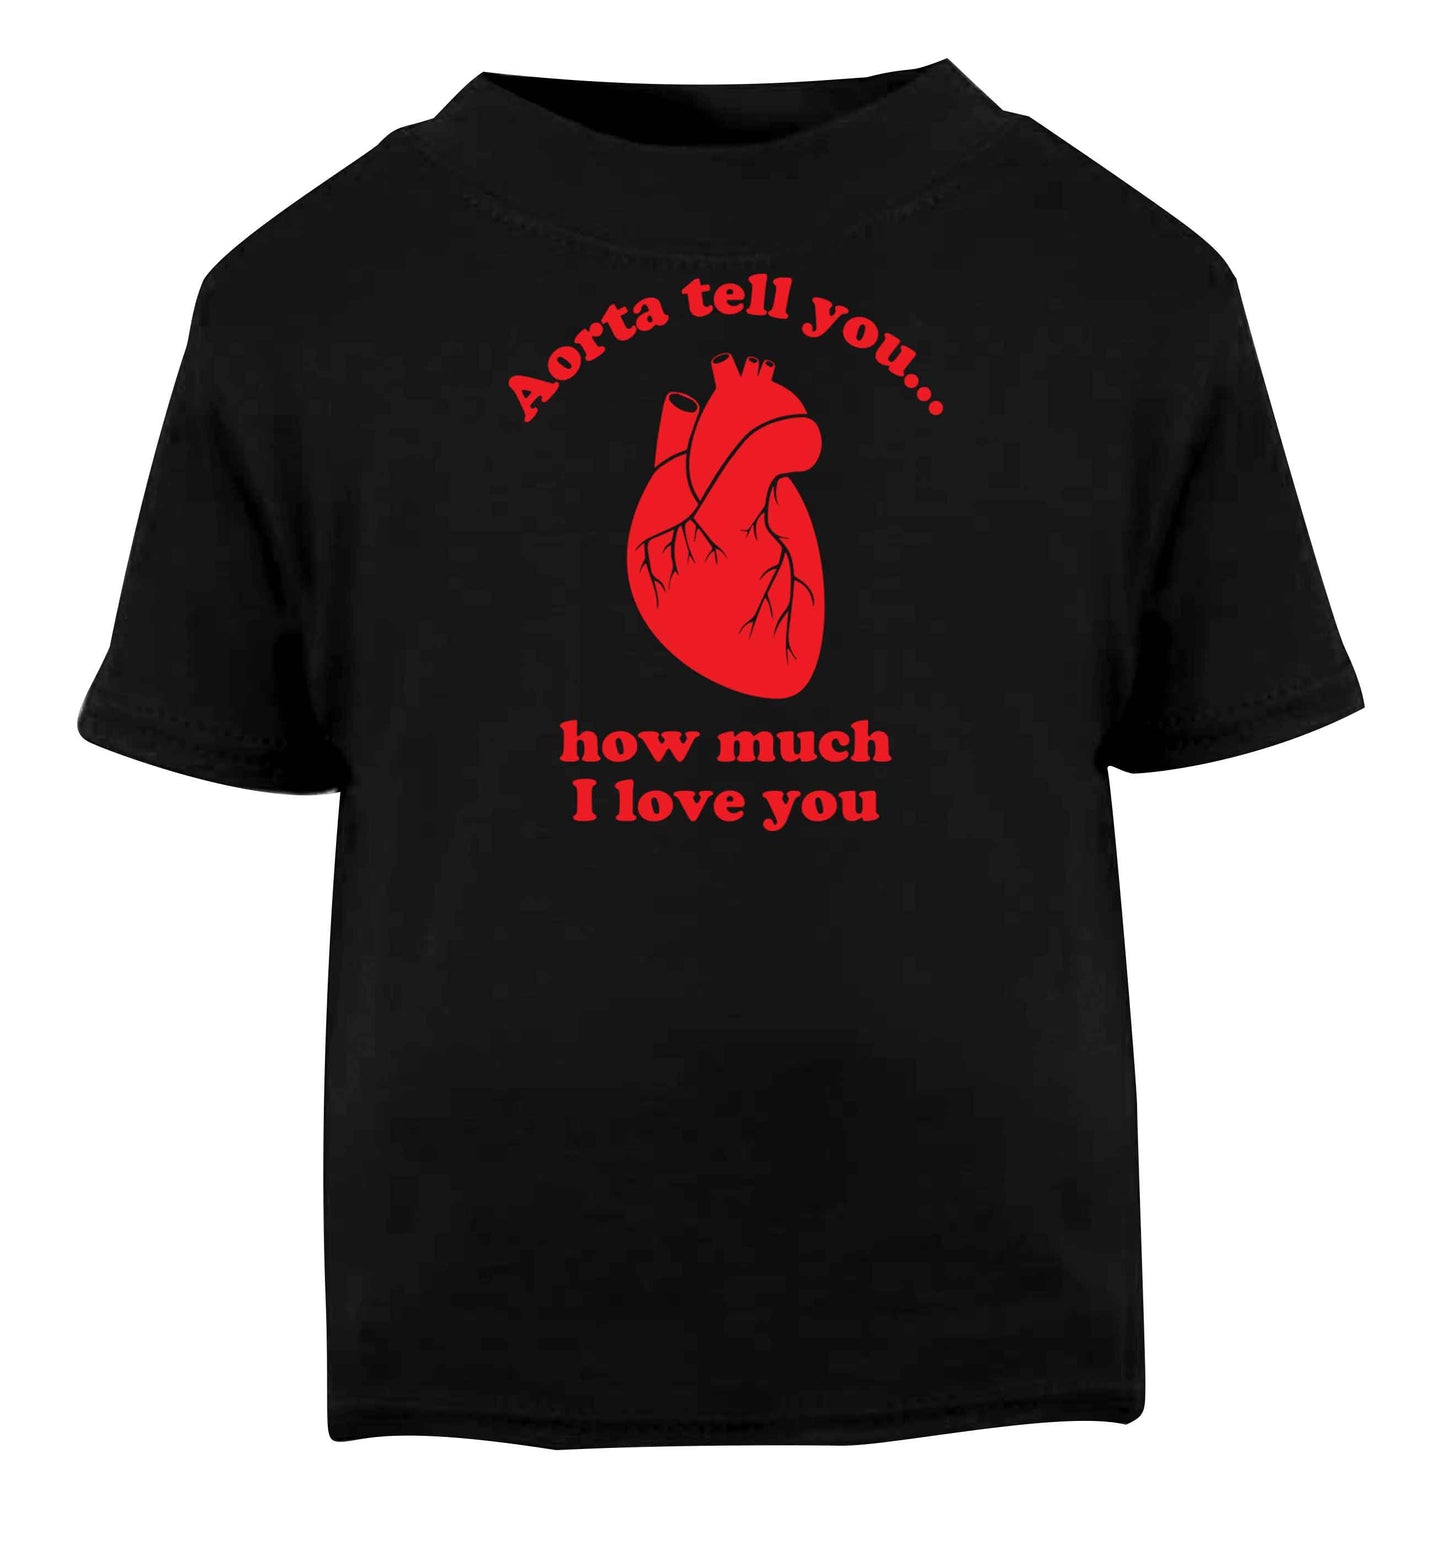 Aorta tell you how much I love you Black baby toddler Tshirt 2 years